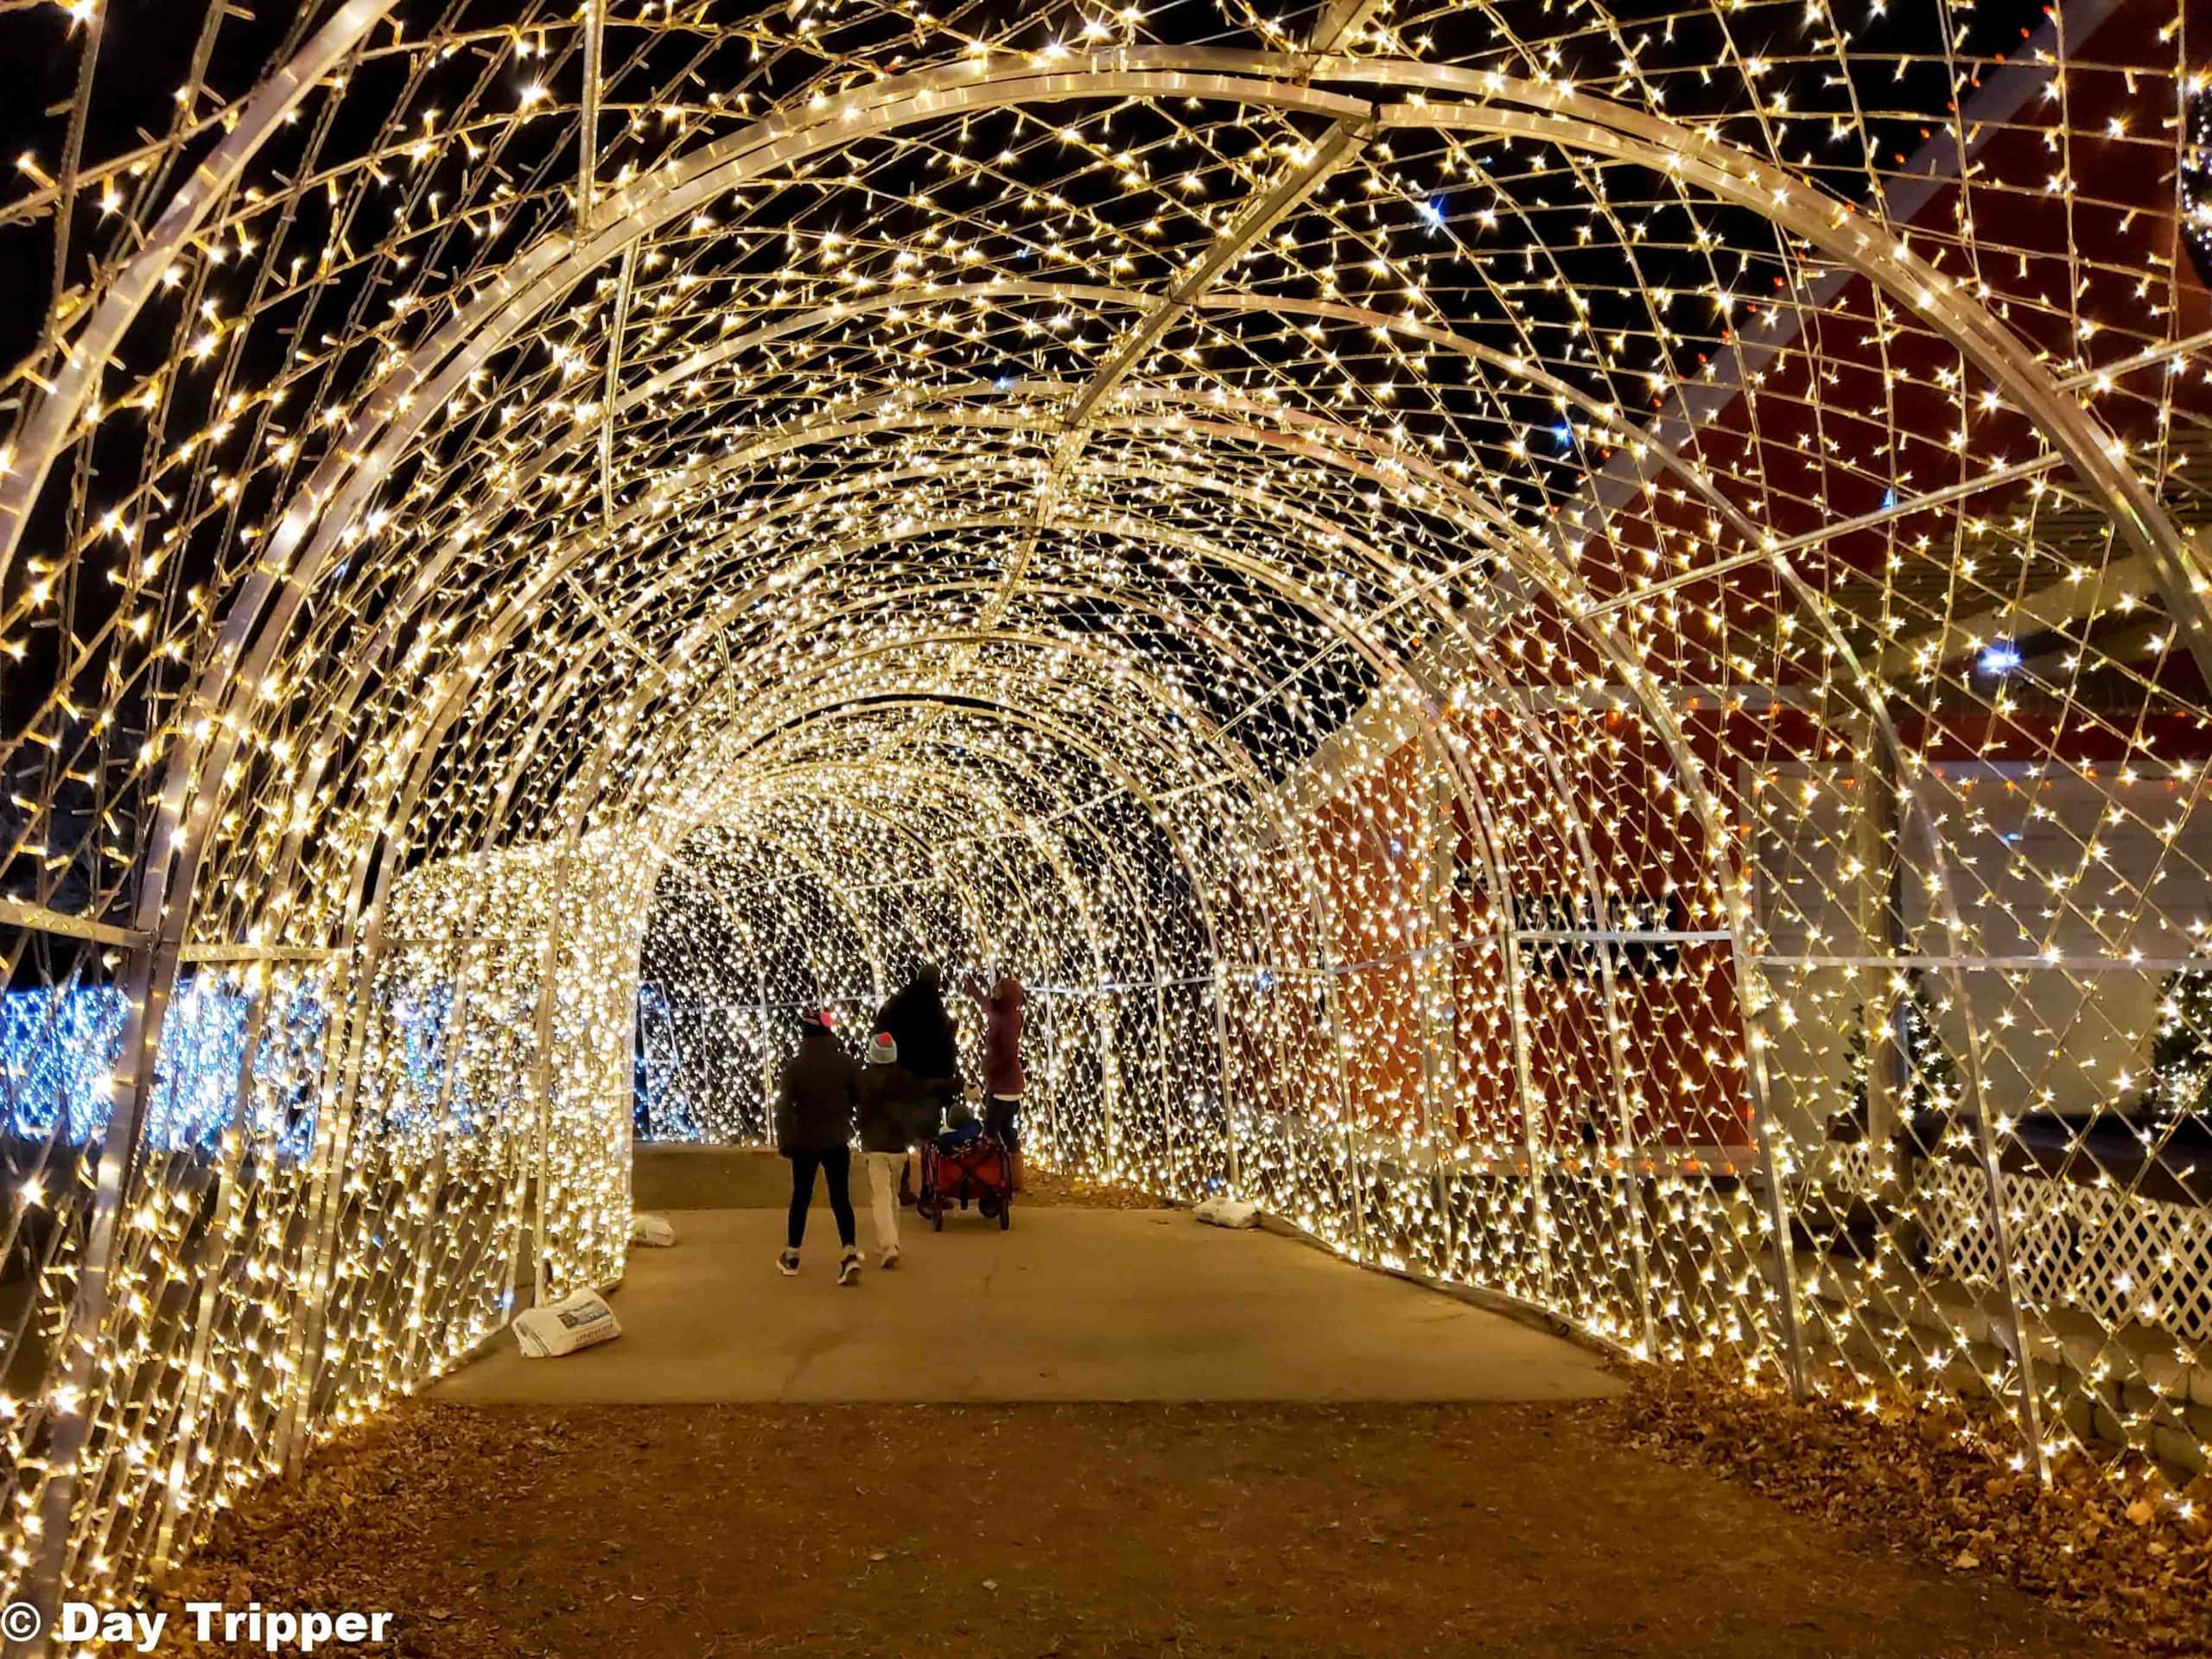 11 Reasons Why You Should Attend the Annual Glow Holiday Festival in St